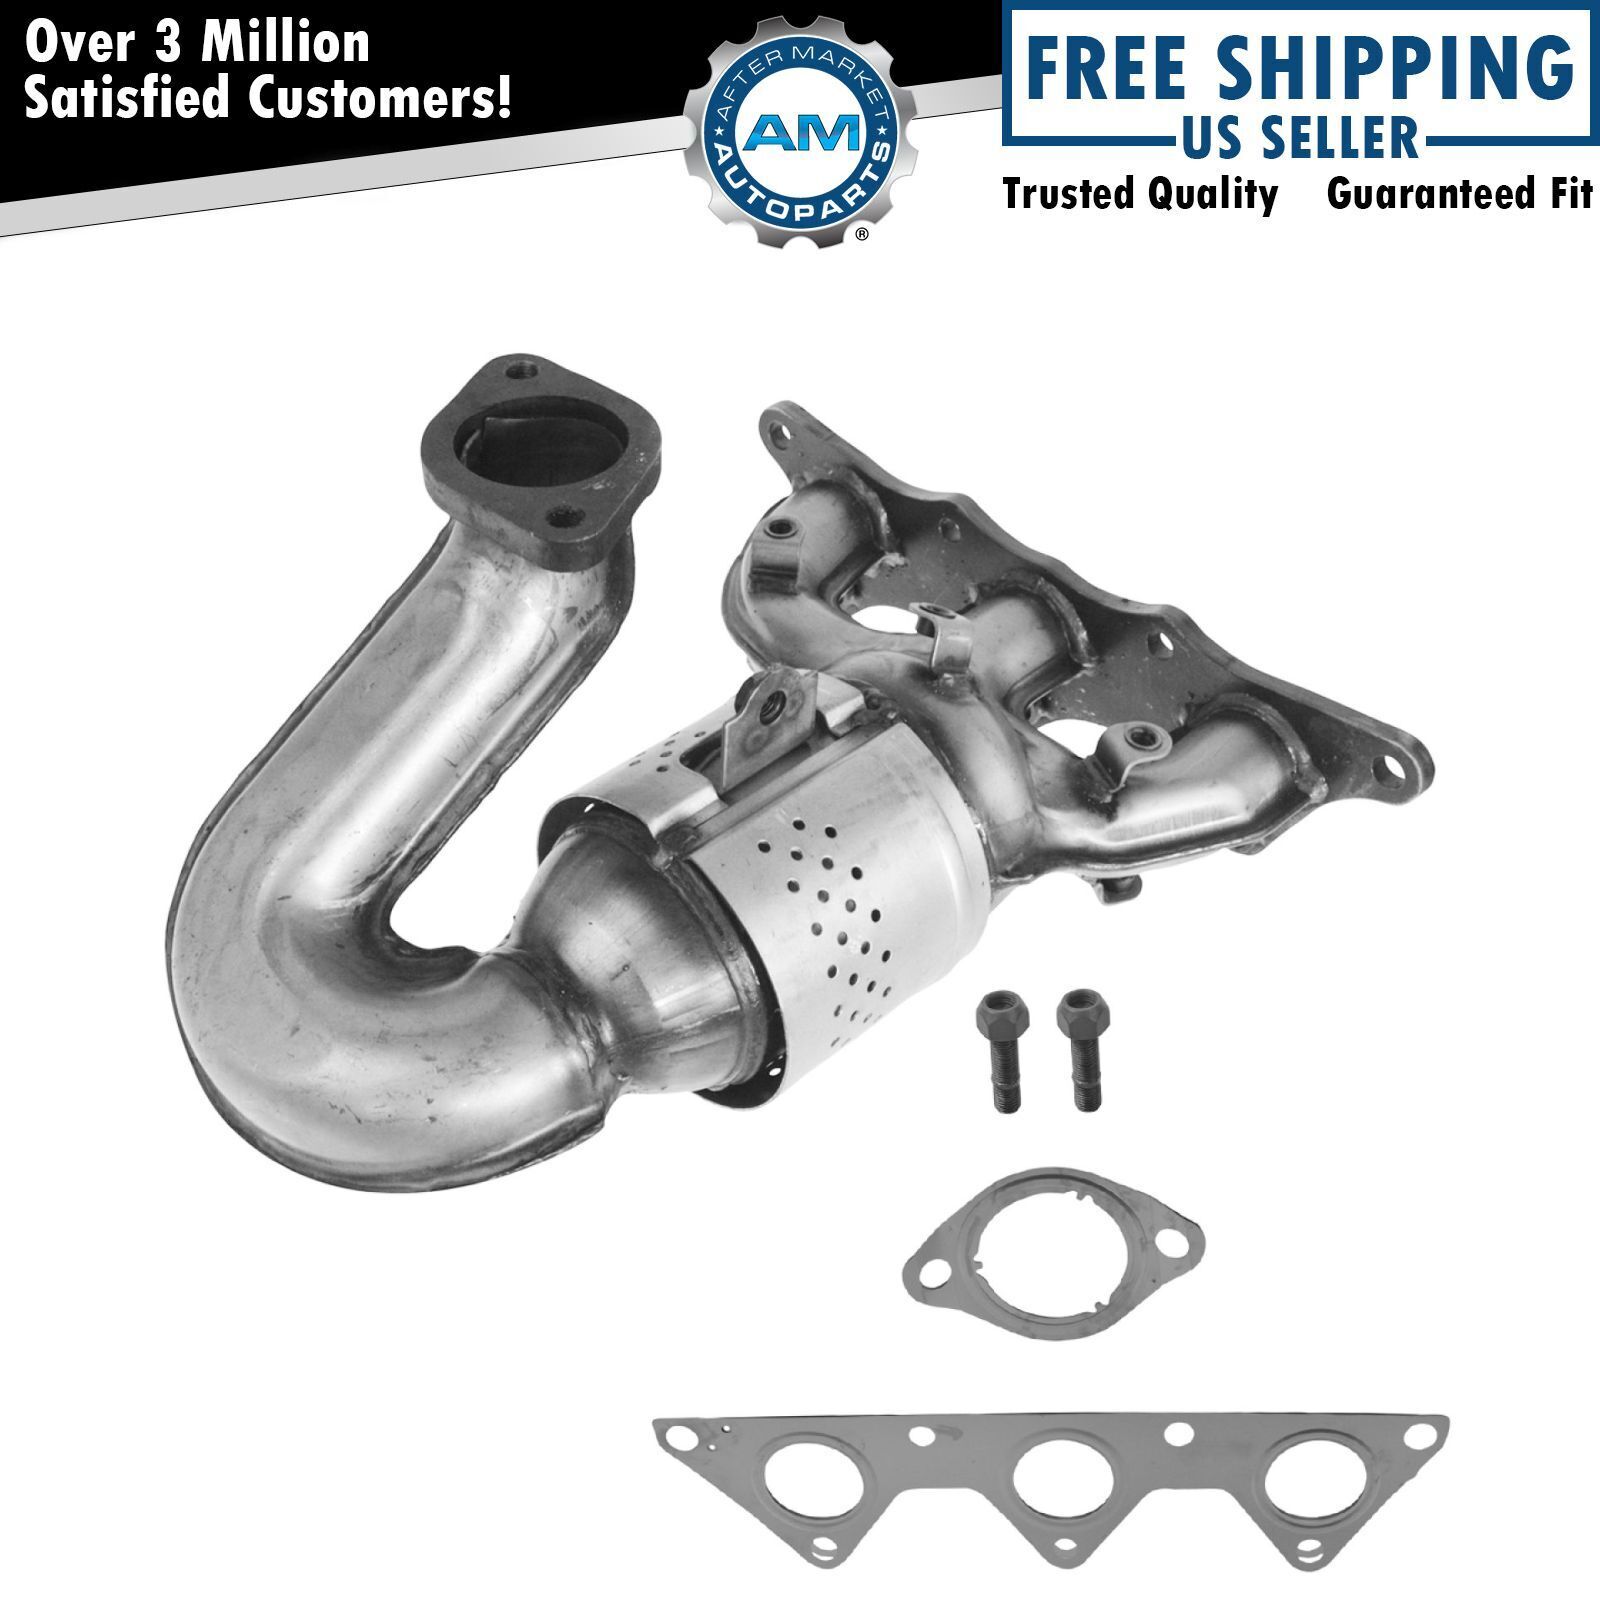 Exhaust Manifold w Catalytic Converter RH Firewall Side for Eclipse Galant 3.8L